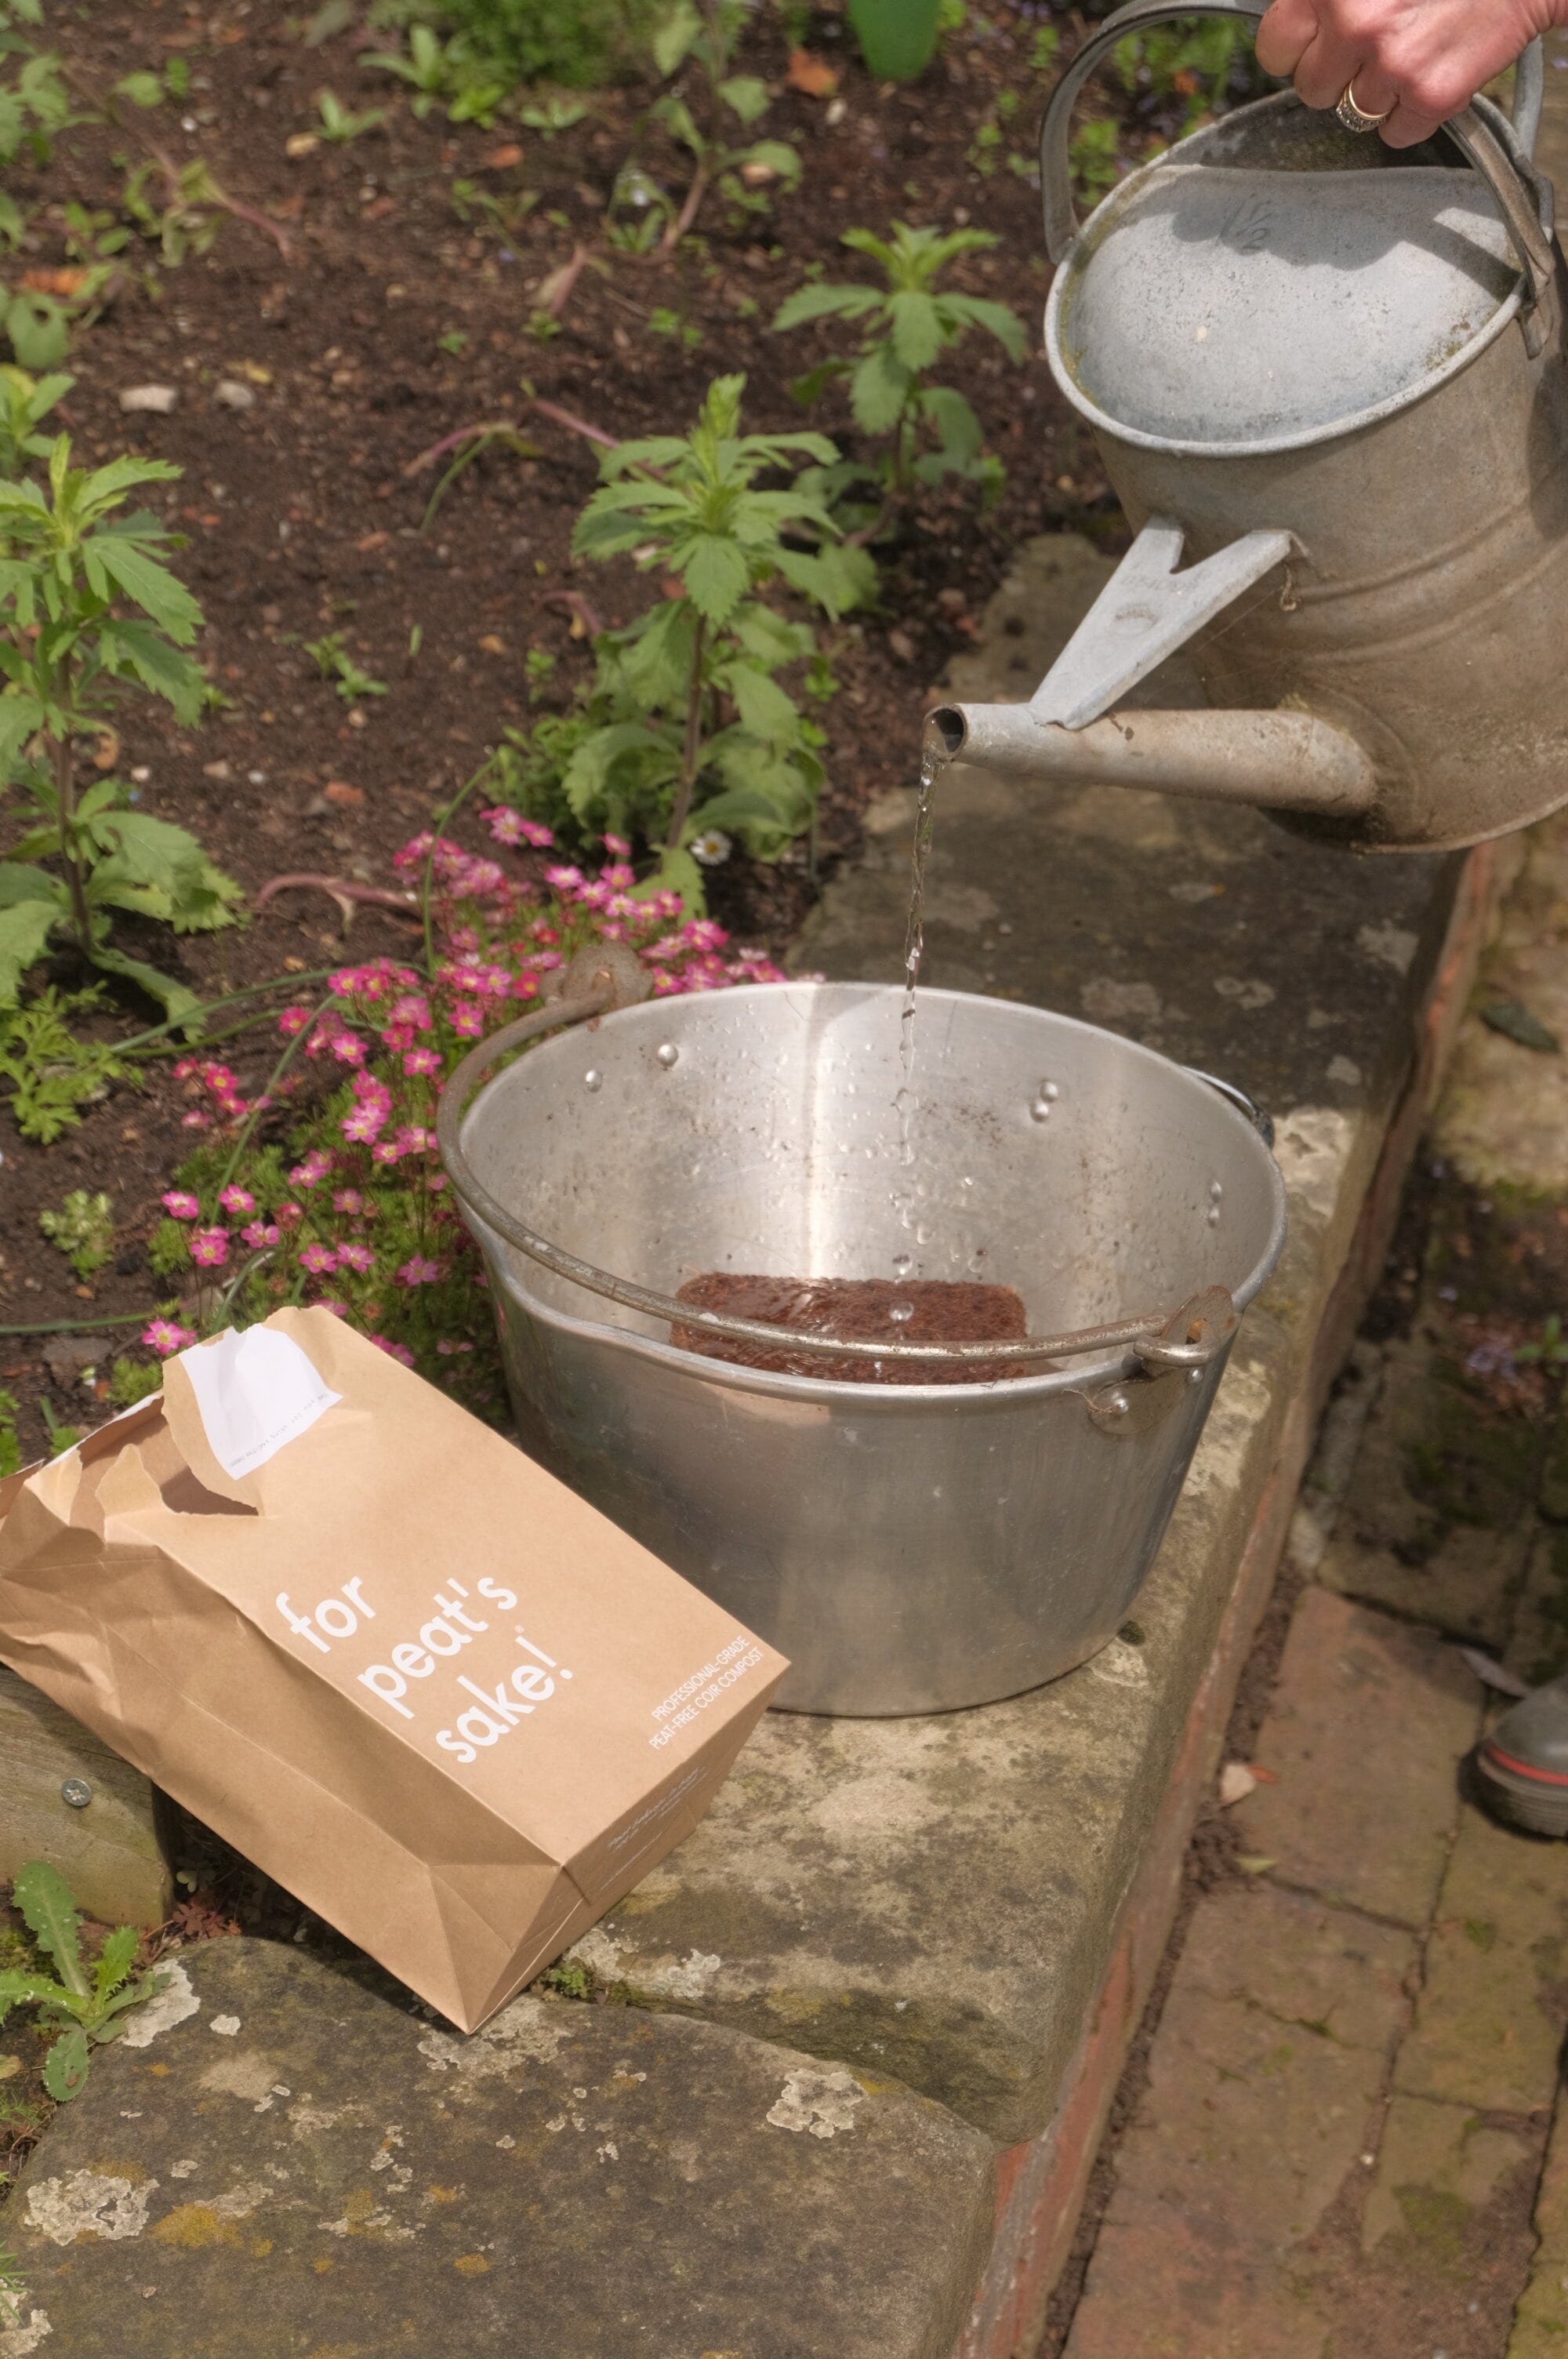 Hydrating coir compost, nourishing the garden's soil for vibrant plant growth